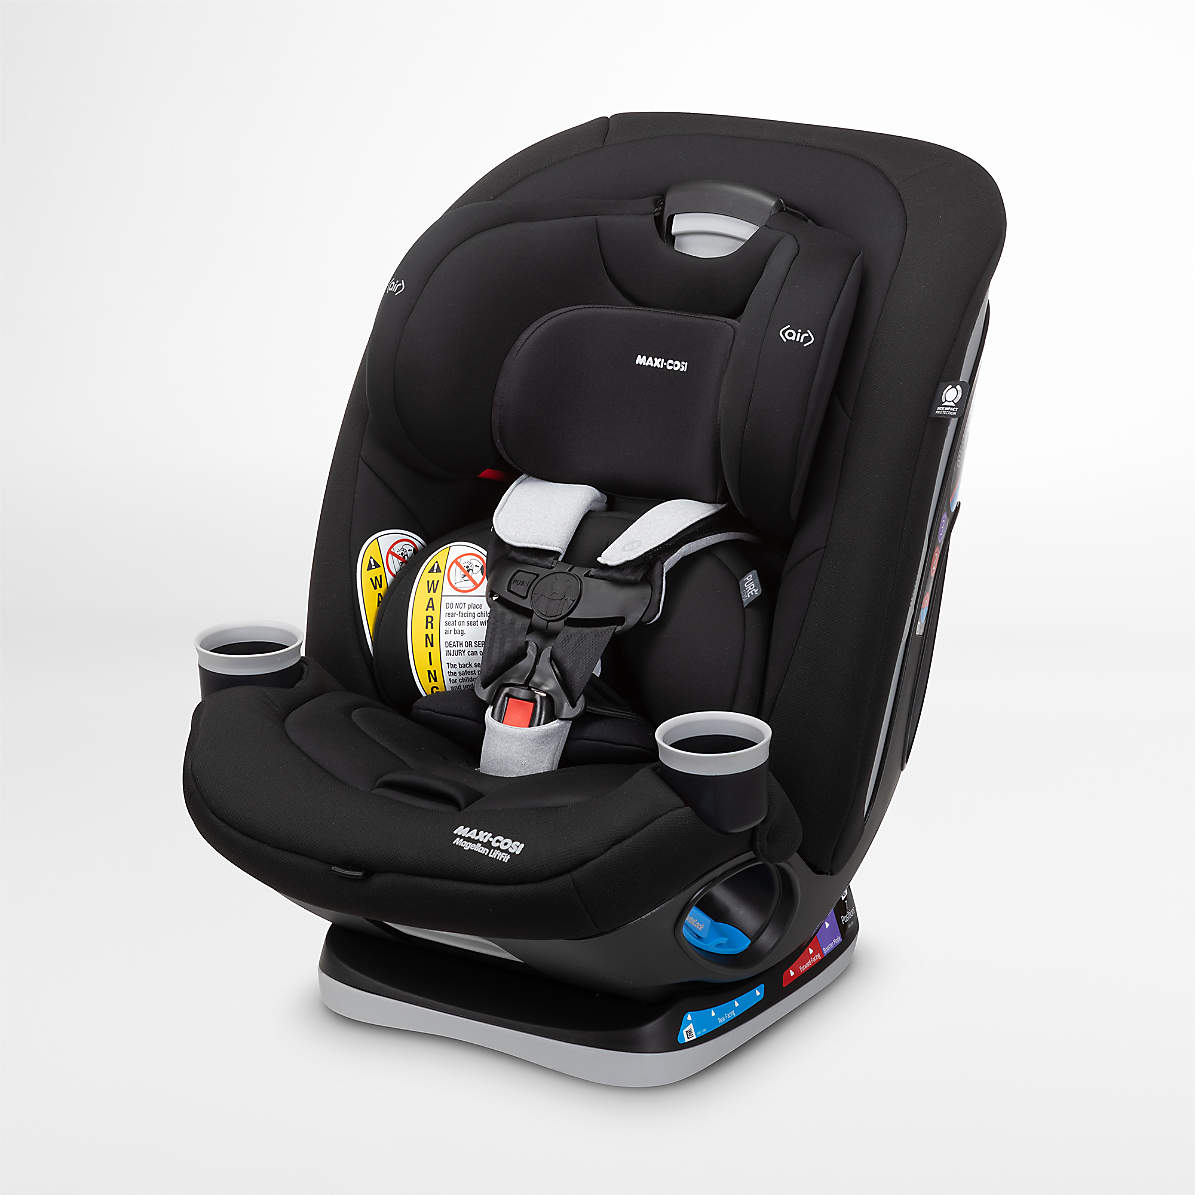 LiftFit Black All-in-One Convertible Baby Car Seat + Reviews | Crate & Kids